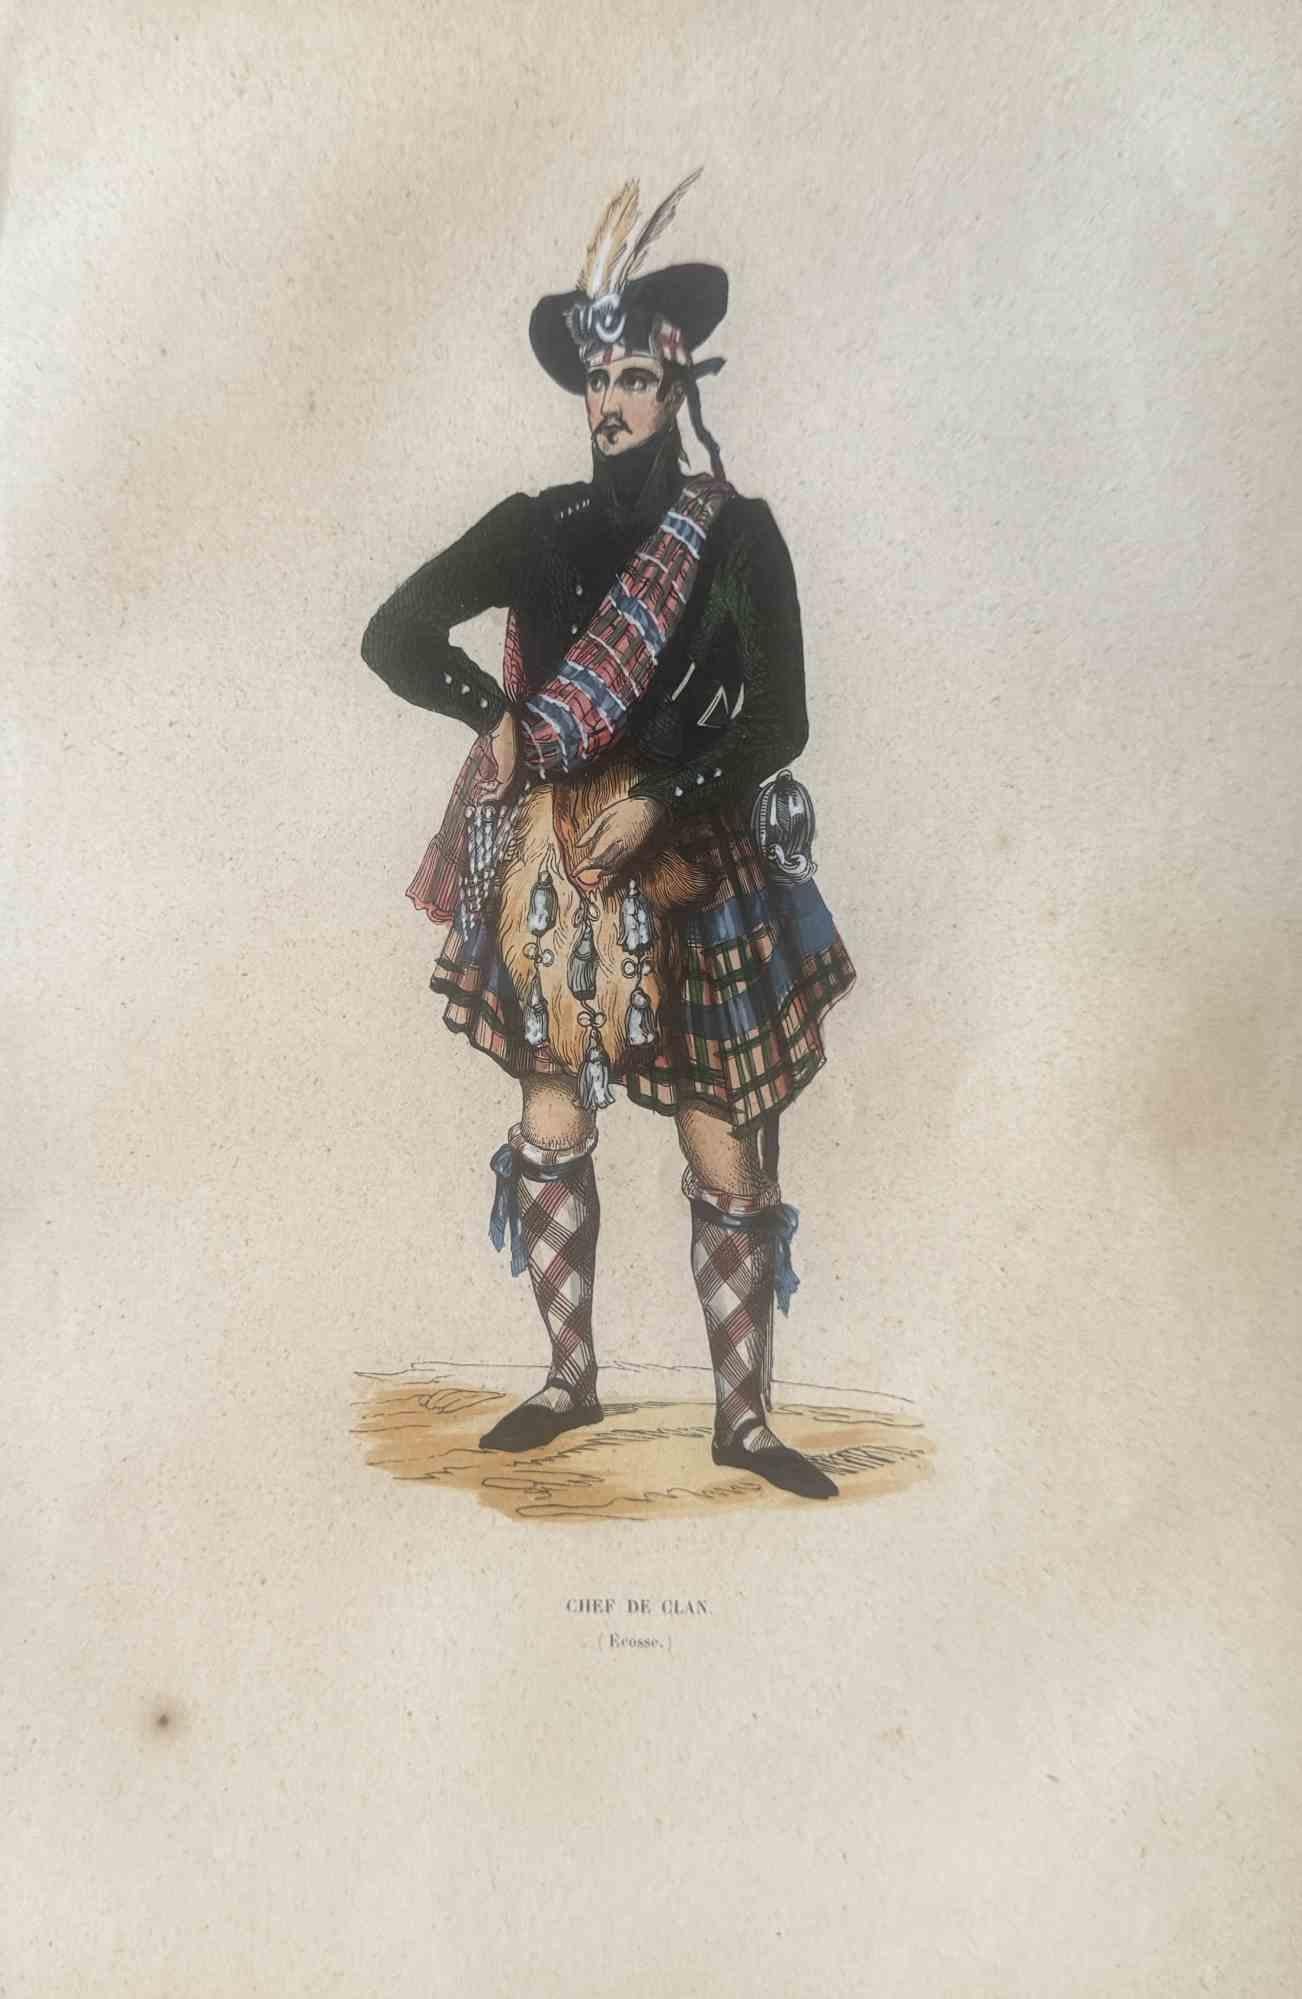 Various Artists Figurative Print - Uses and Customs - Chef de Clan - Lithograph - 1862